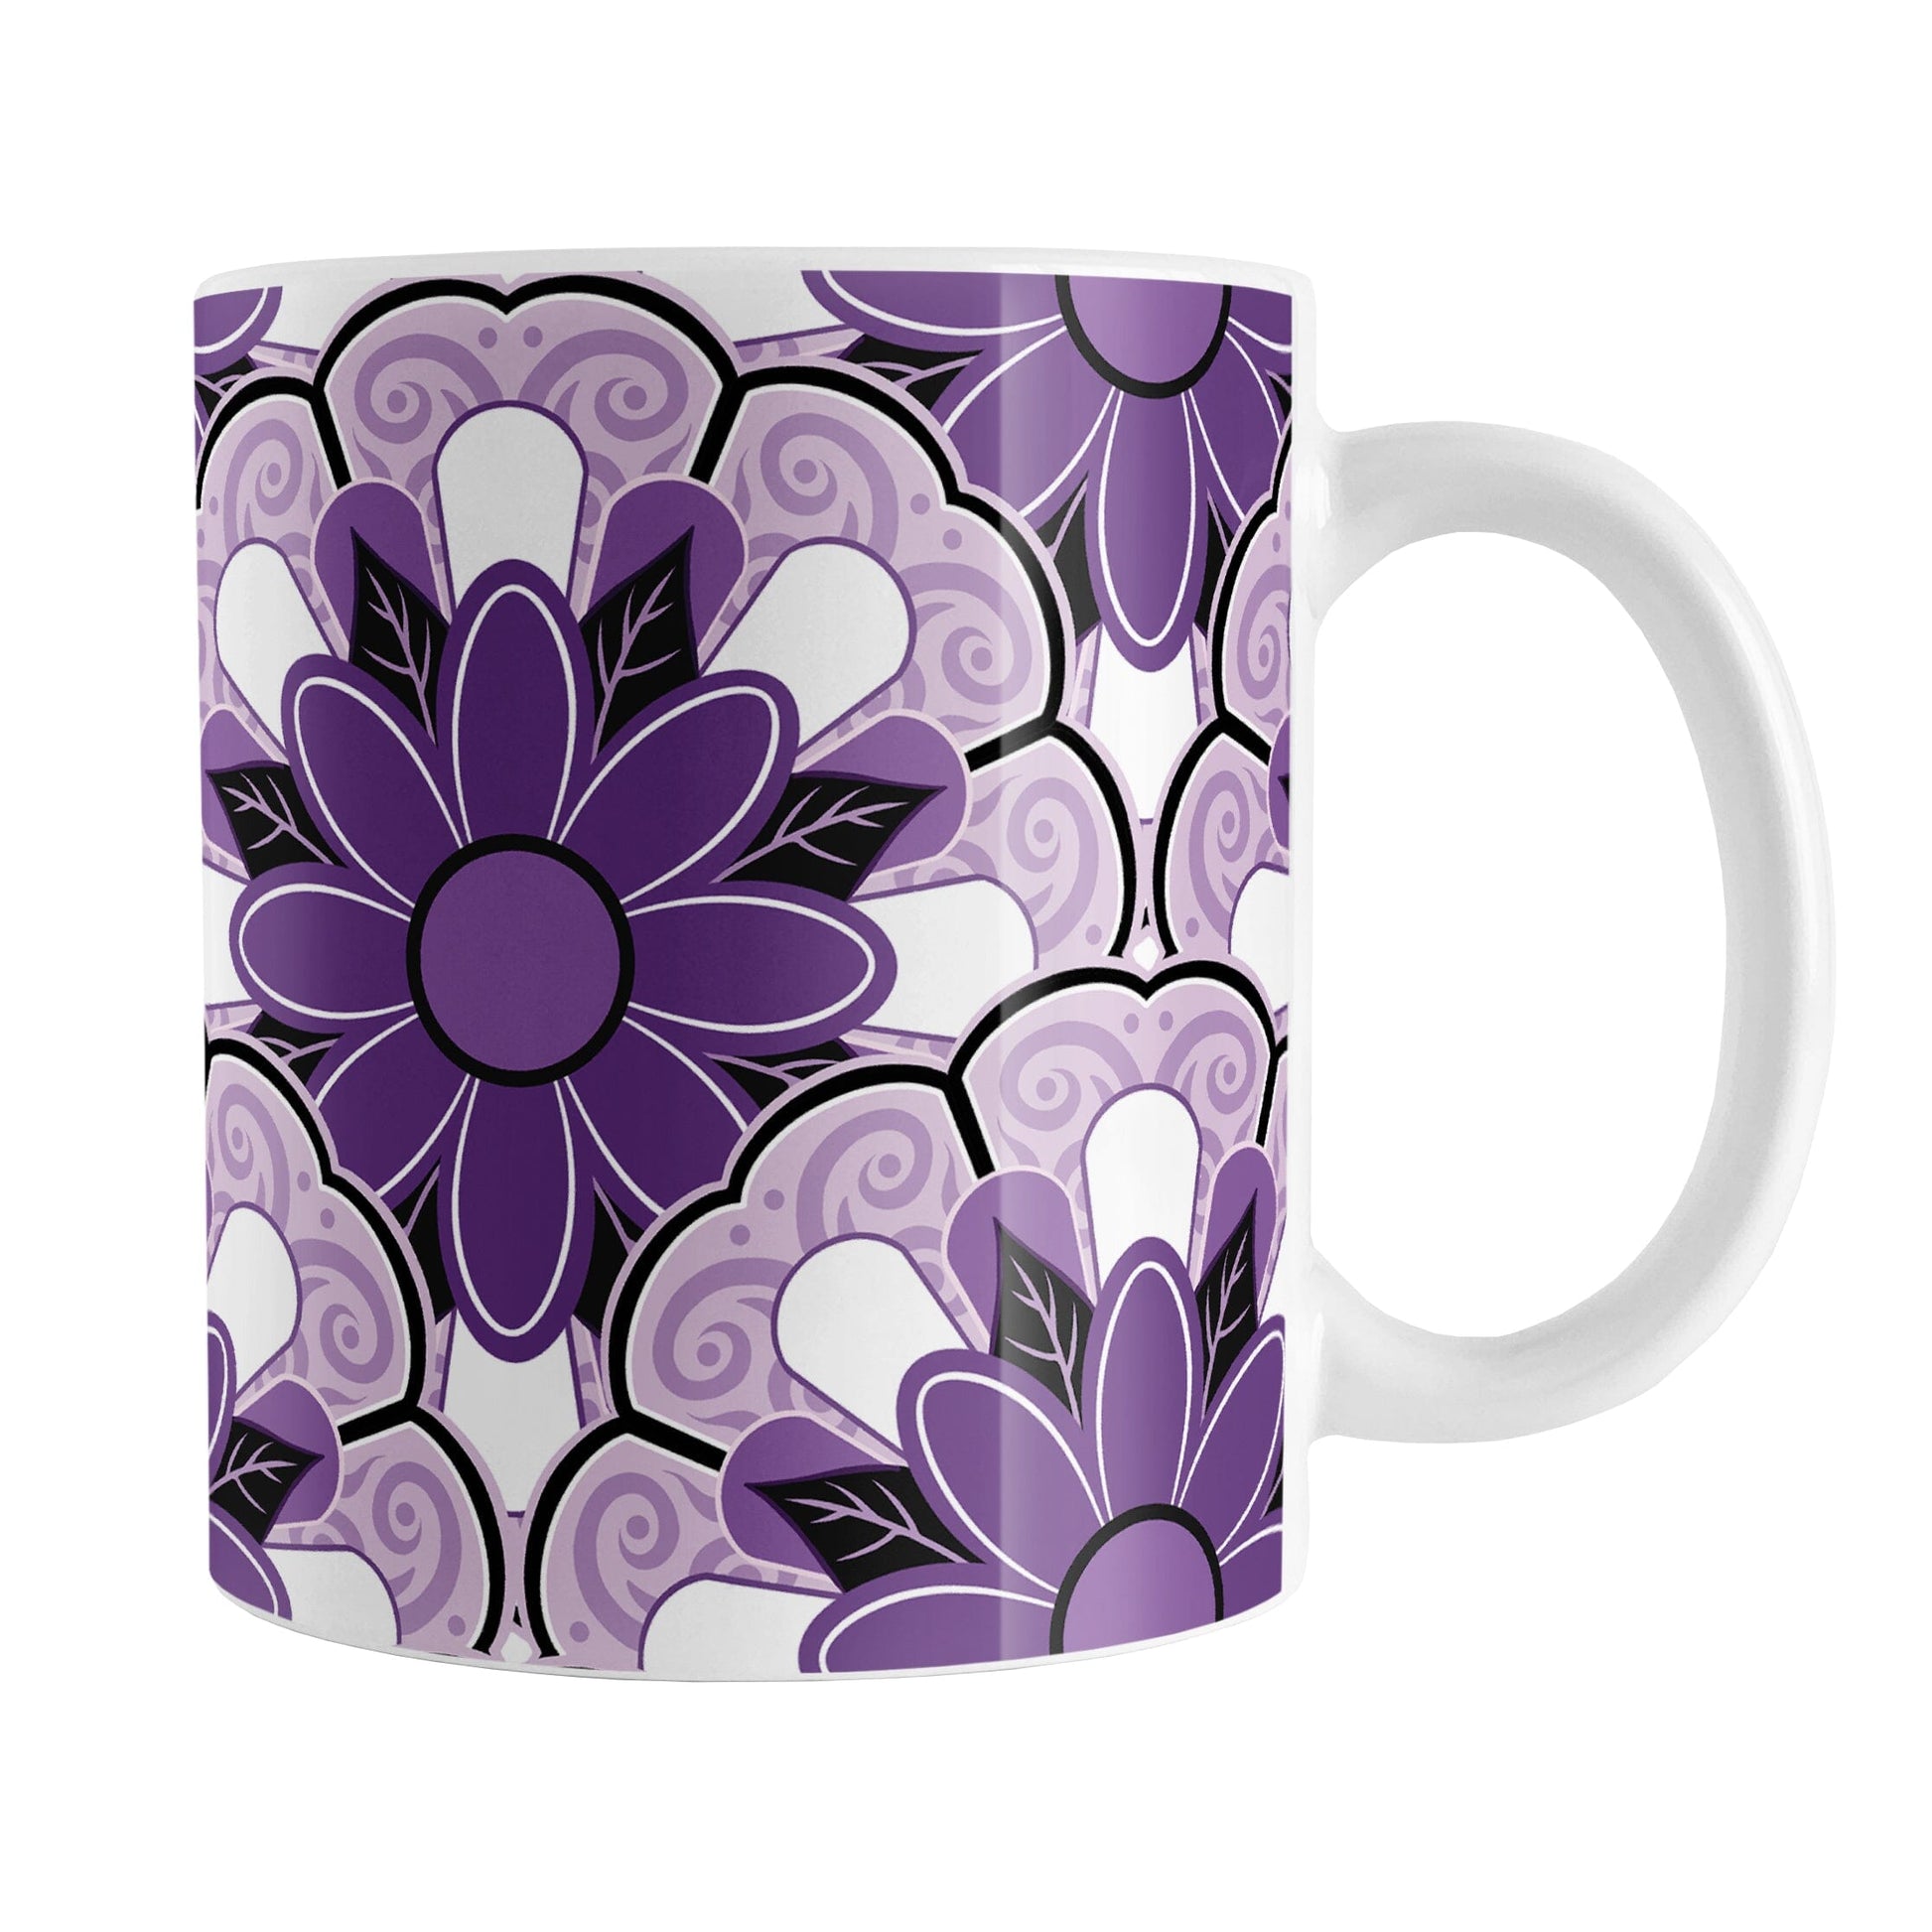 Purple Flower Tiles Pattern Mug (11oz) at Amy's Coffee Mugs. A ceramic coffee mug featuring a purple monochromatic pattern of floral-shaped tiles each with a stack of different purple flower designs centered within it. This large flower pattern design wraps around the mug to the handle.